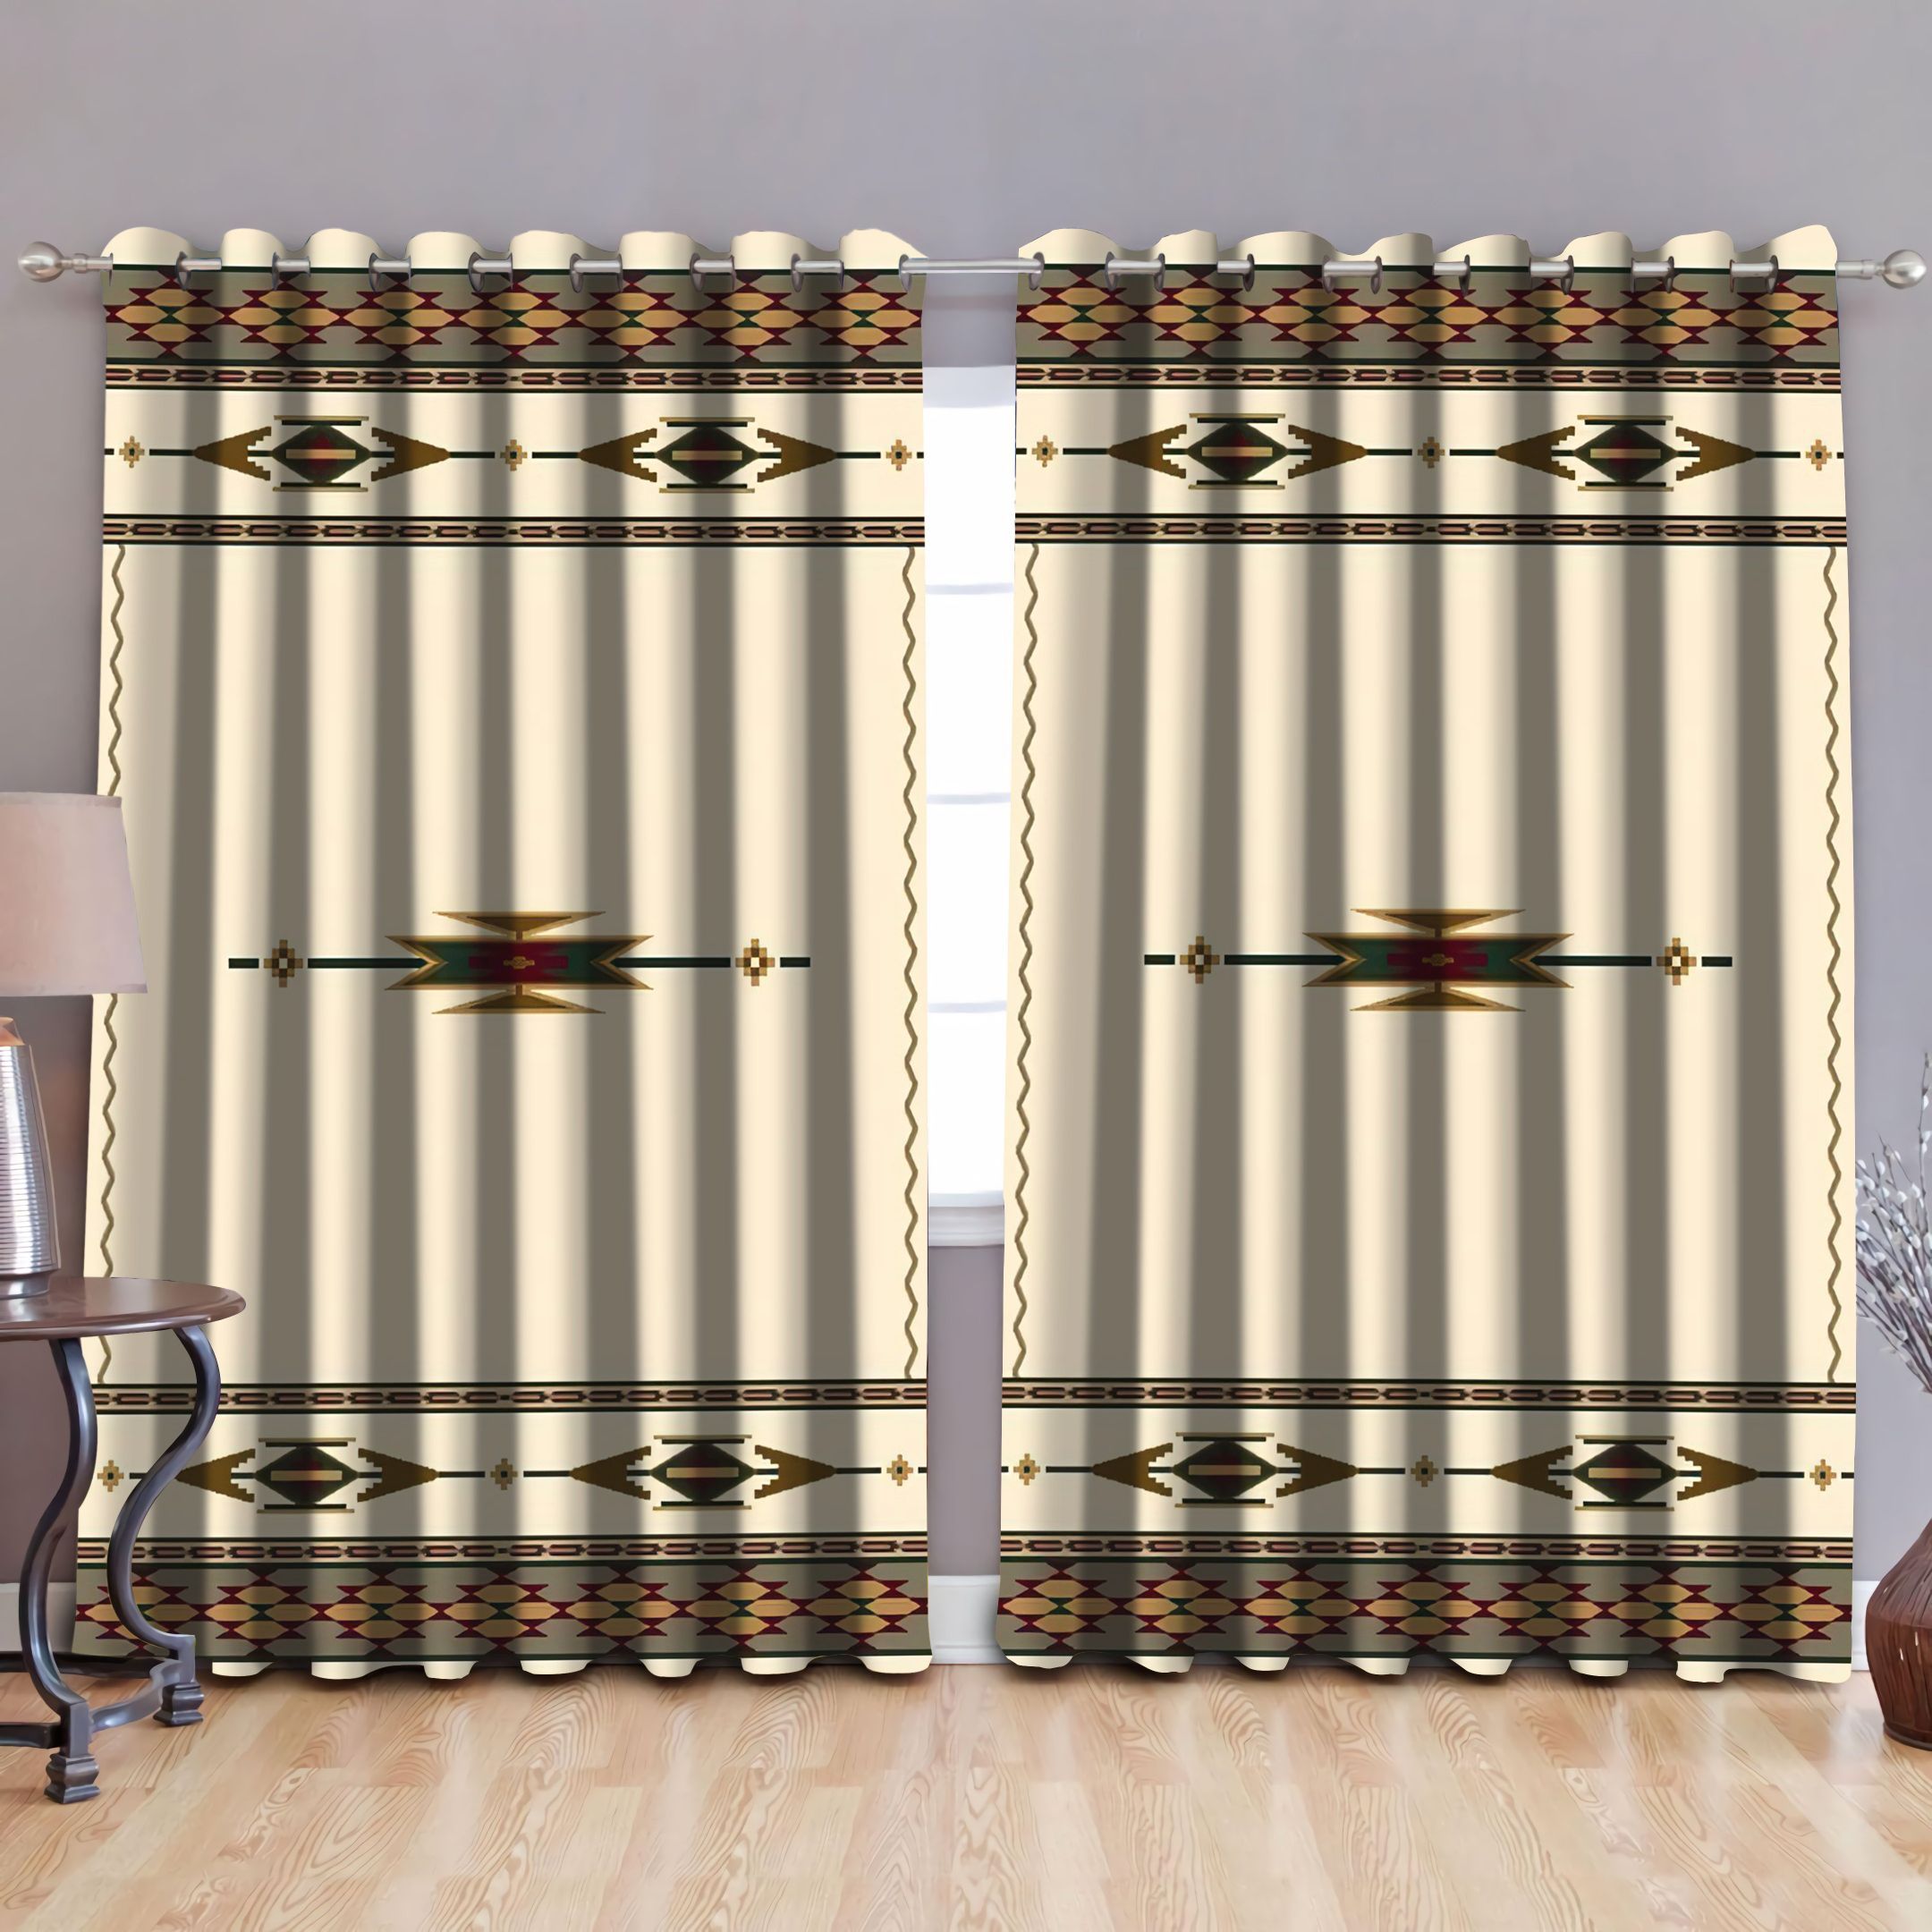 Native American Pattern Blackout Printed Window Curtains Home Decor